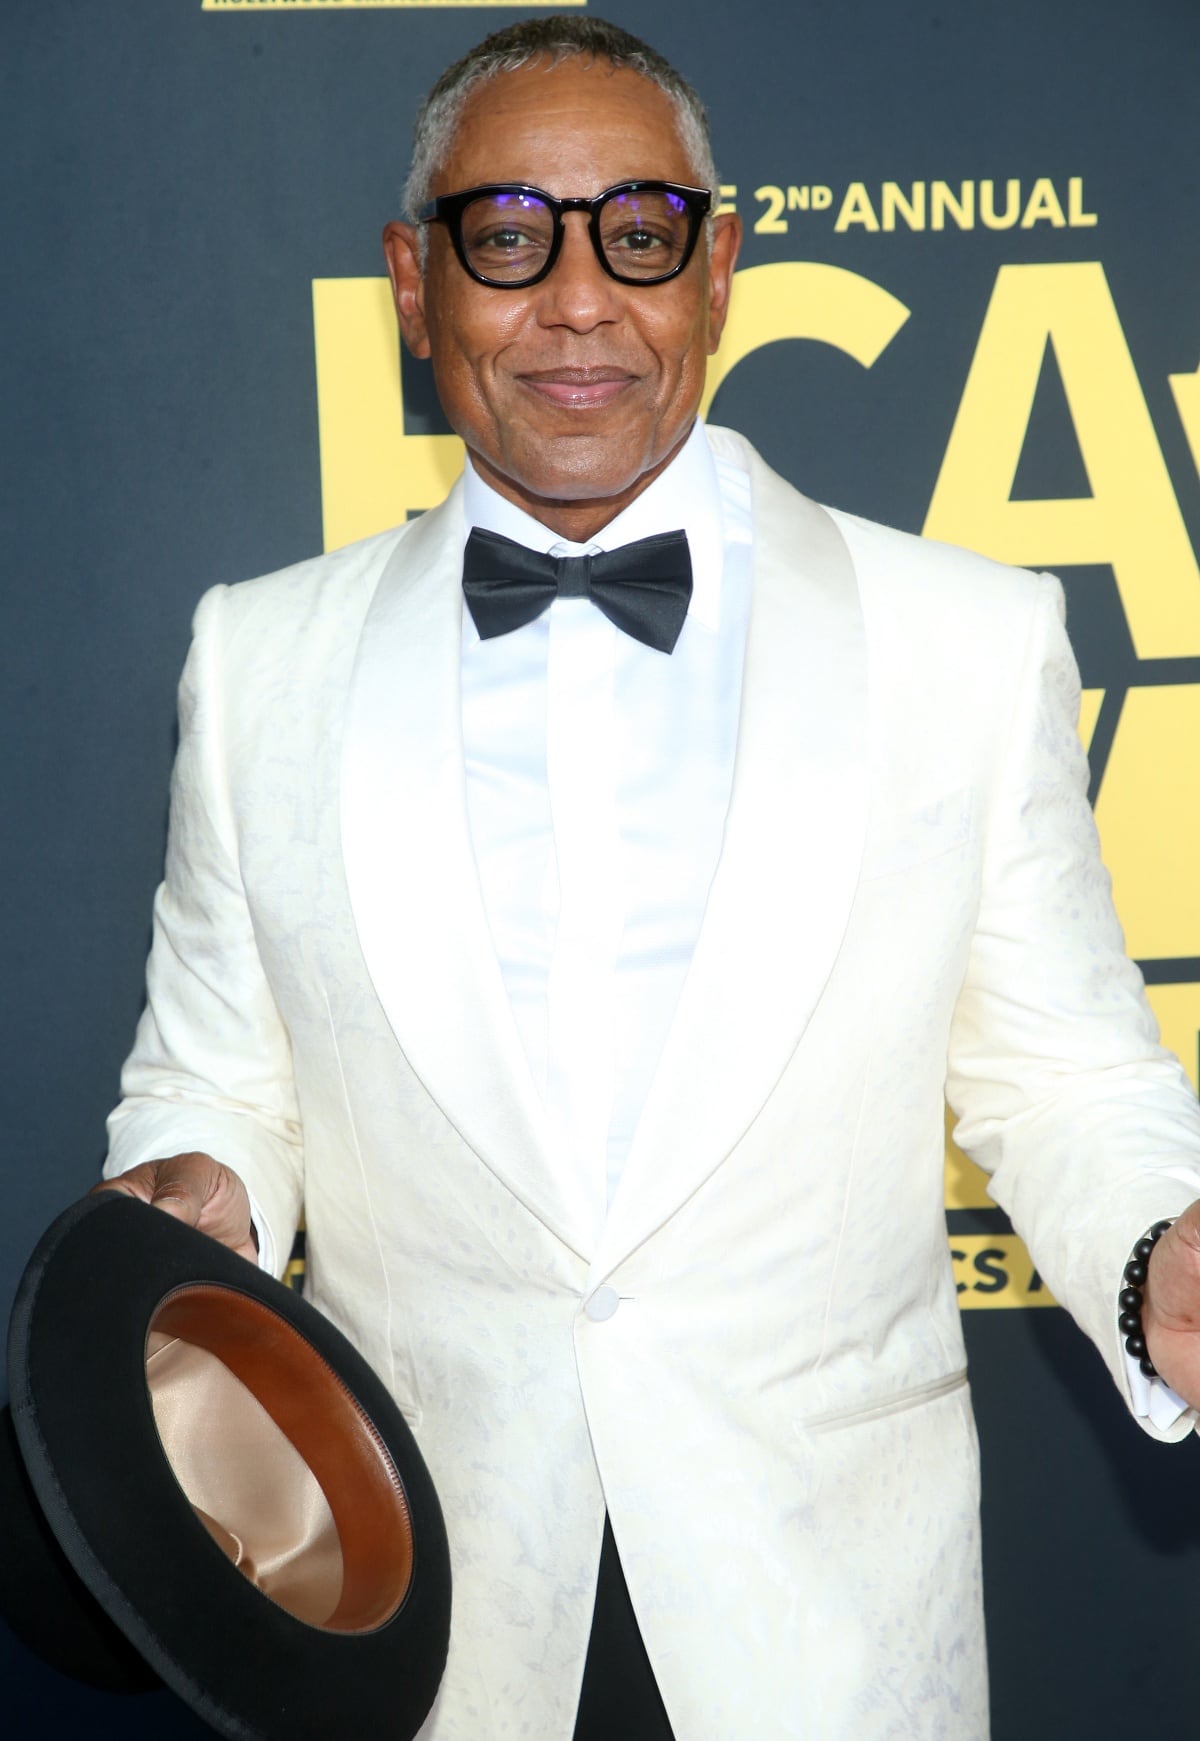 Giancarlo Esposito looking dapper at the 2nd Annual HCA TV Awards: Broadcast & Cable